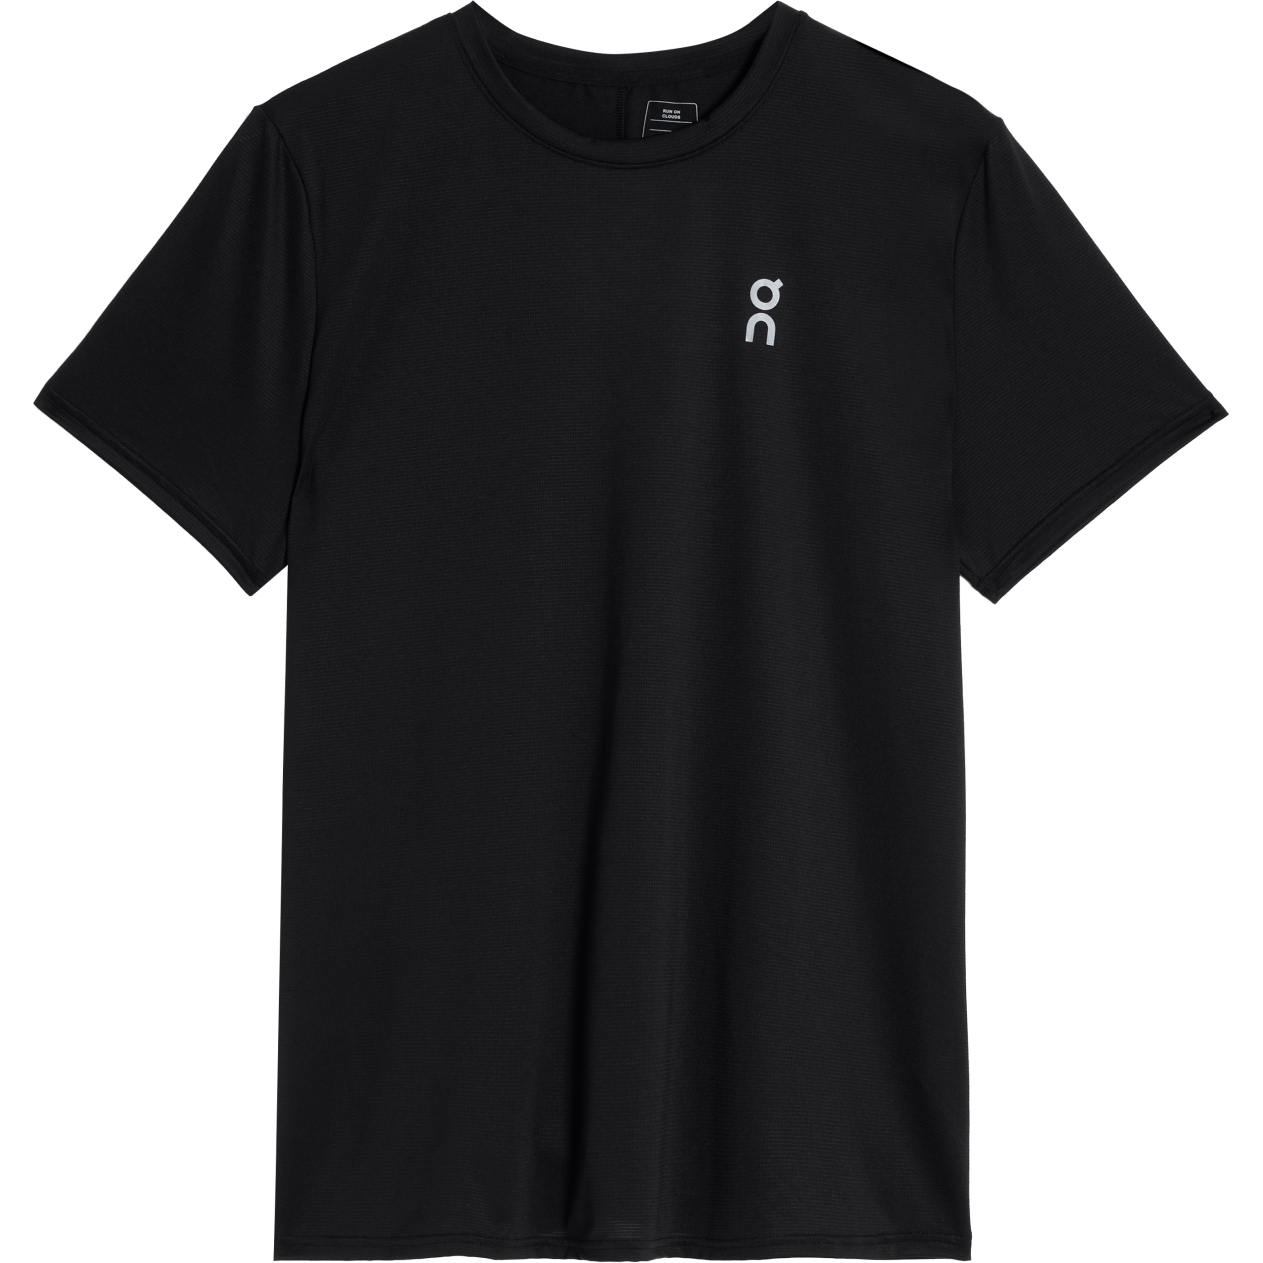 Picture of On Core-T Running Shirt - Black